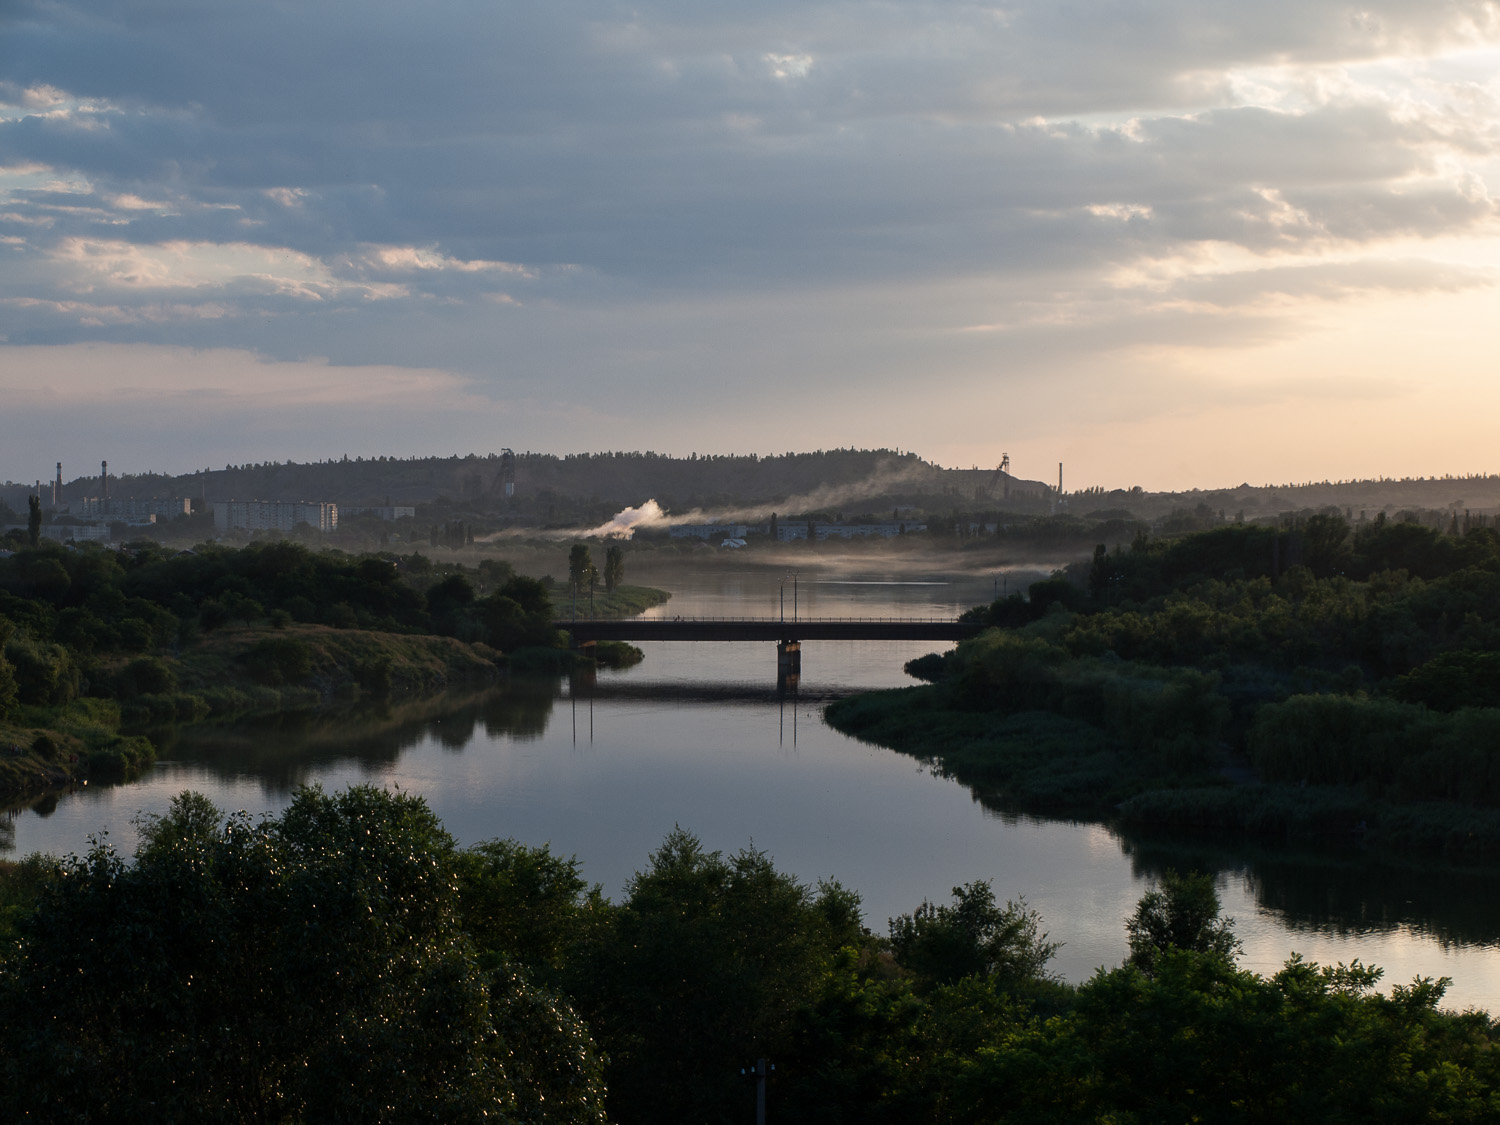  A view over the Inhulets river at Kryvyi Rih. Headframes for the city’s numerous iron ore mines are visible in the background. 